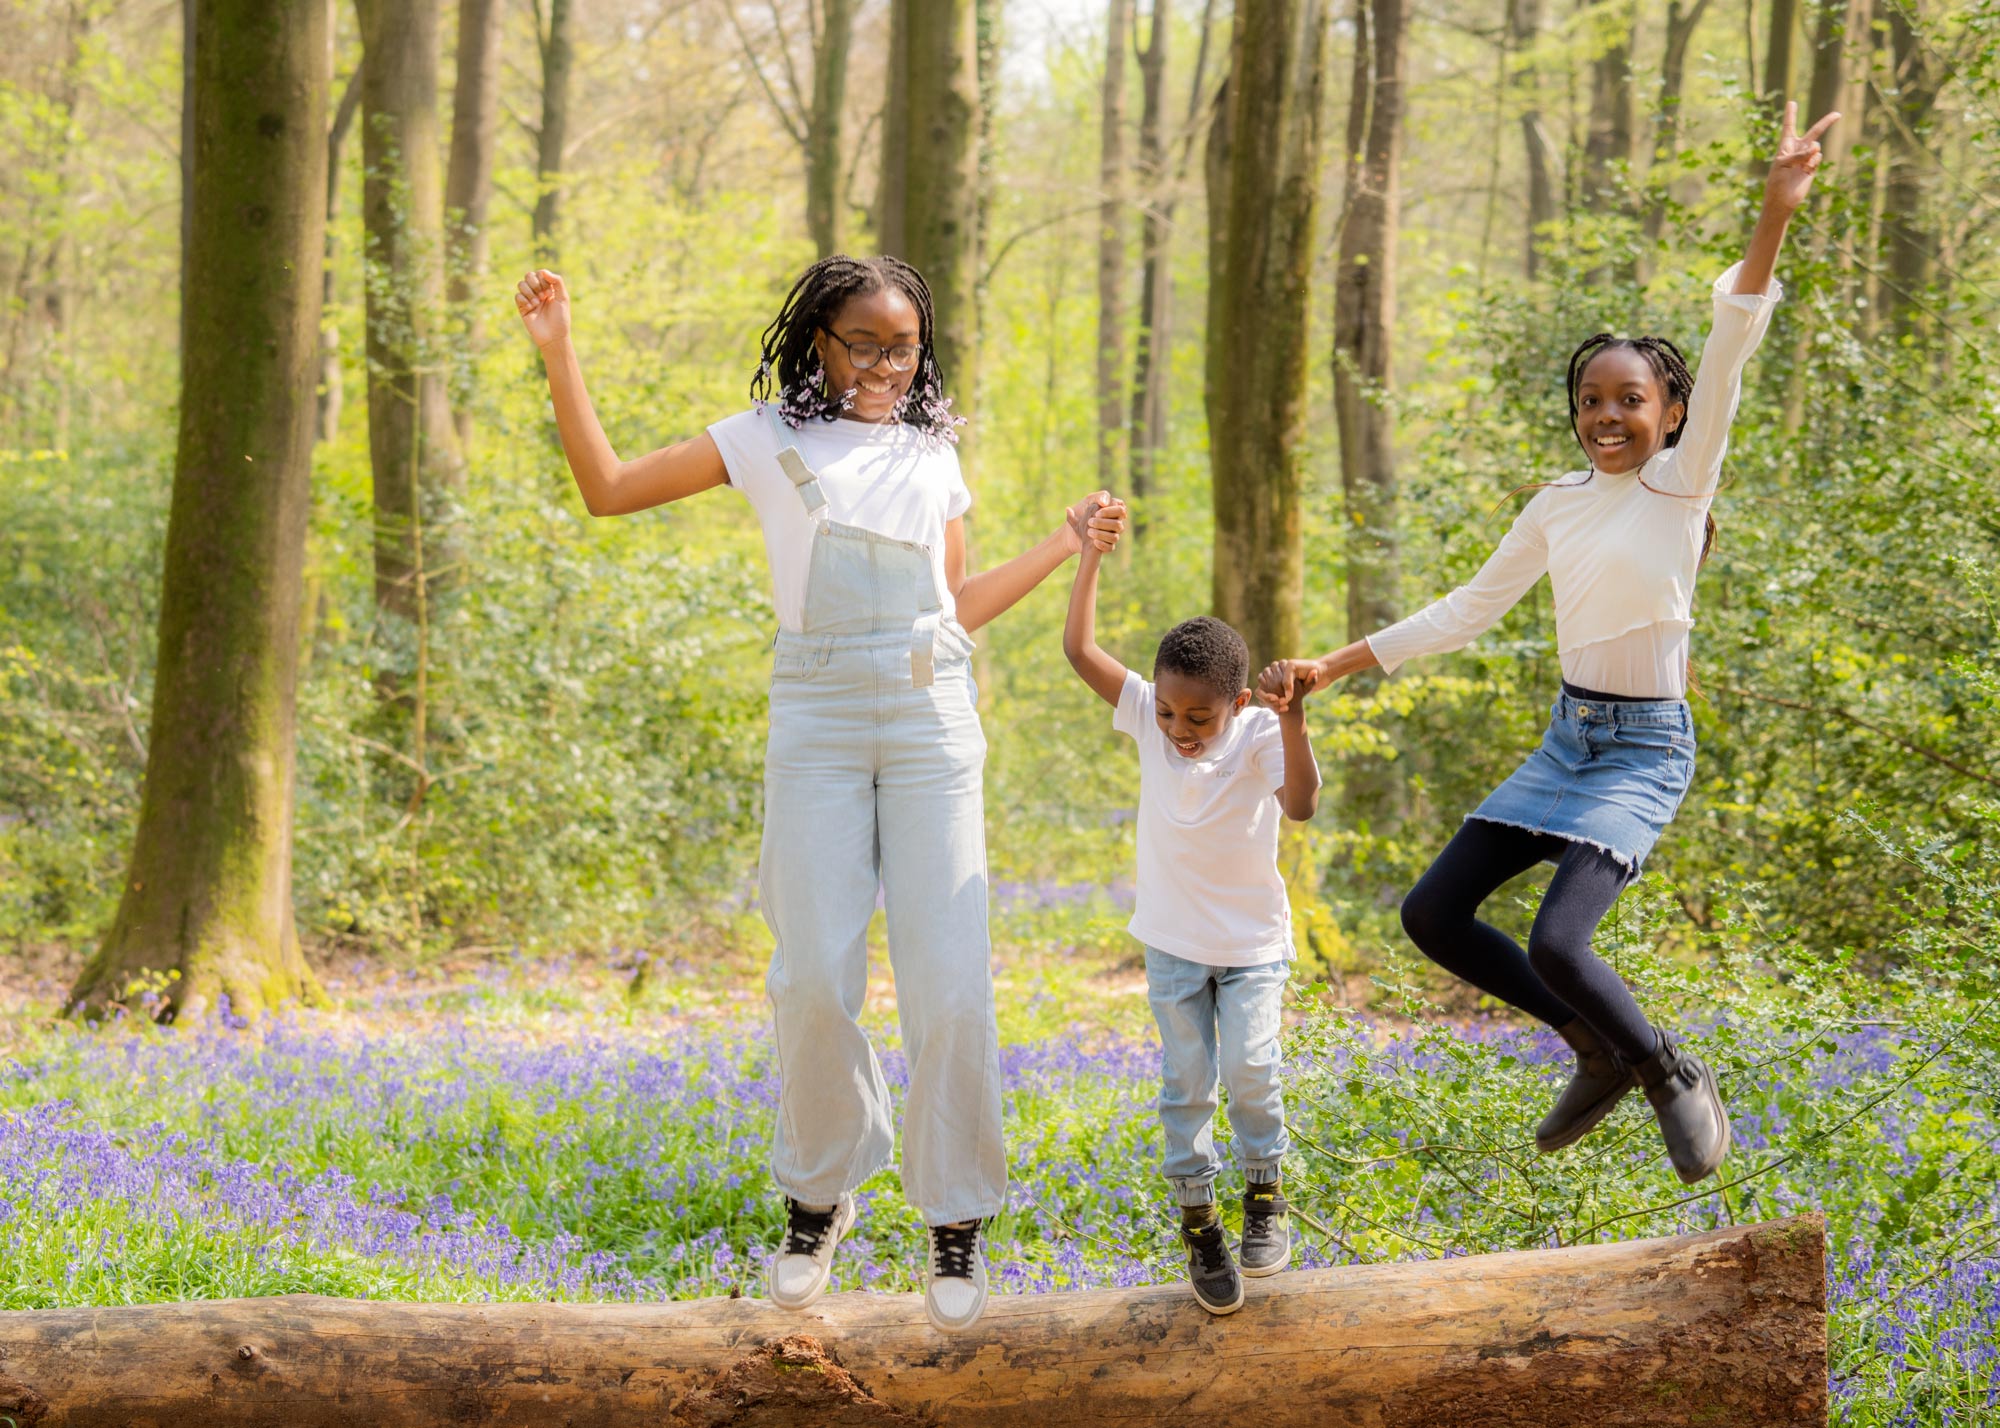 Three children wearing white t-shirts, jumping off a fallen tree in the bluebell woods, smiling.